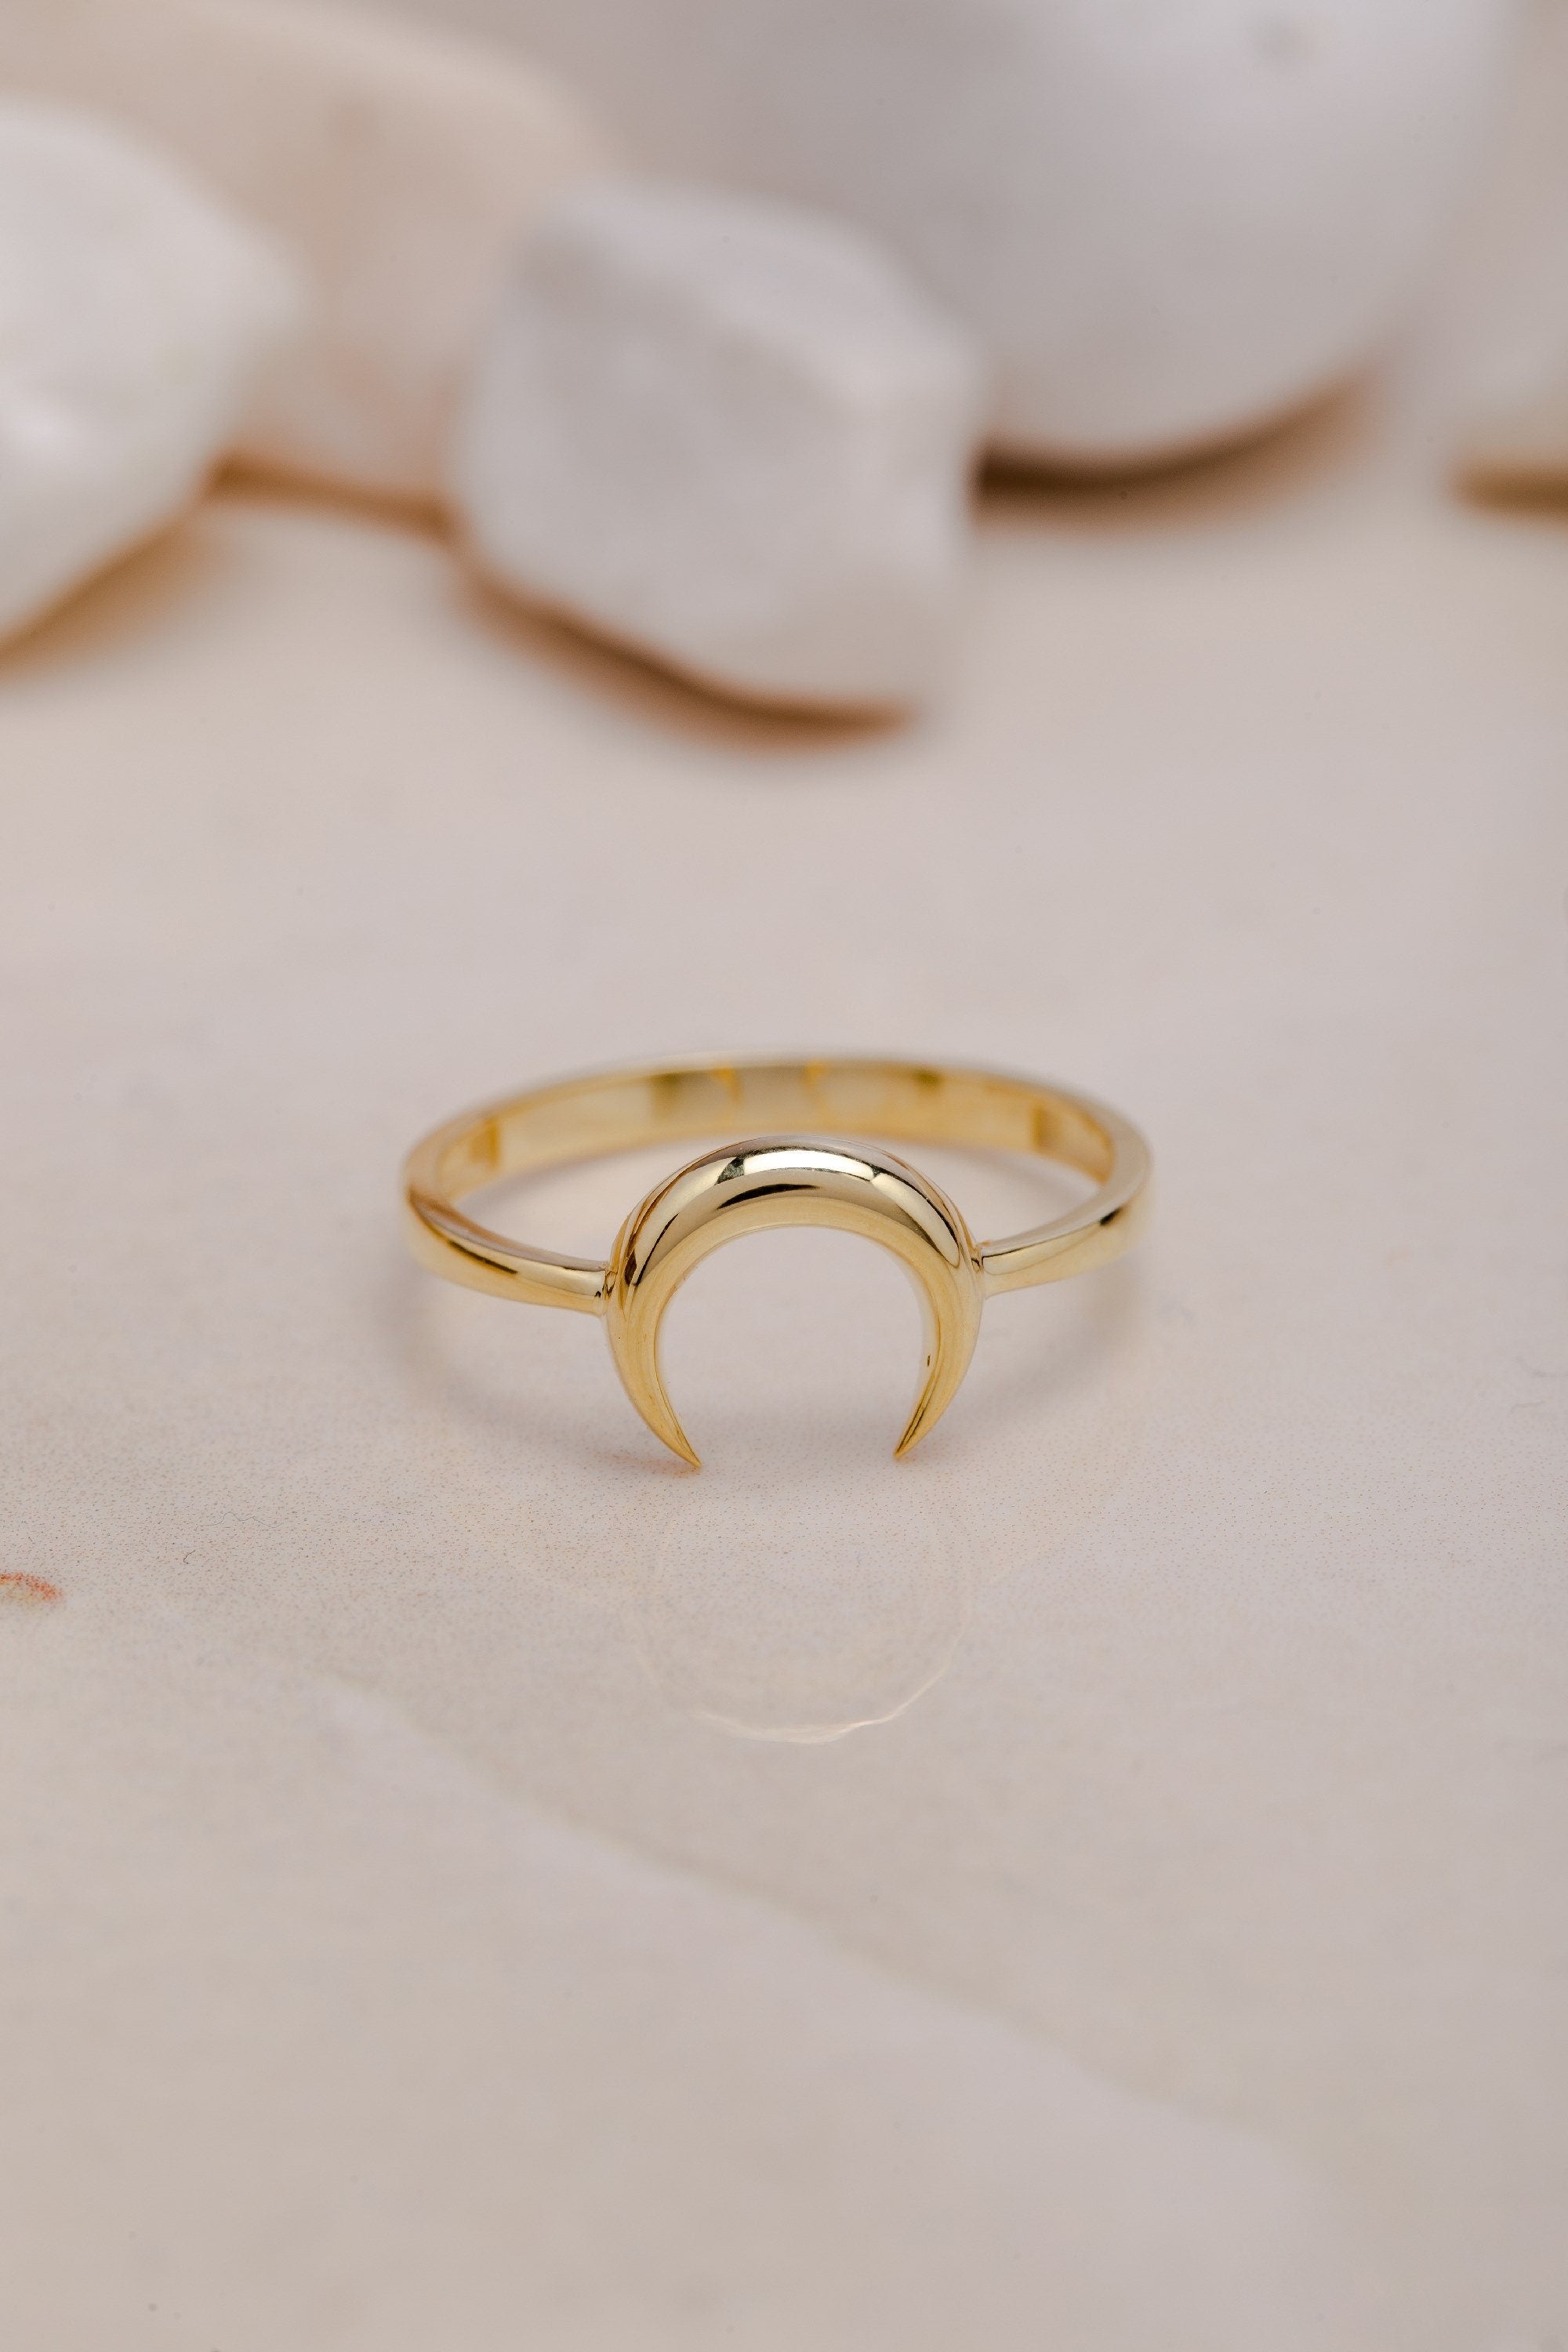 Moon Ring Silver, Open Moon Ring, Tiny Moon Ring For Women, 925 Gold Crescent Moon Rings, Gift For Mother Day, Mother Day Jewelry